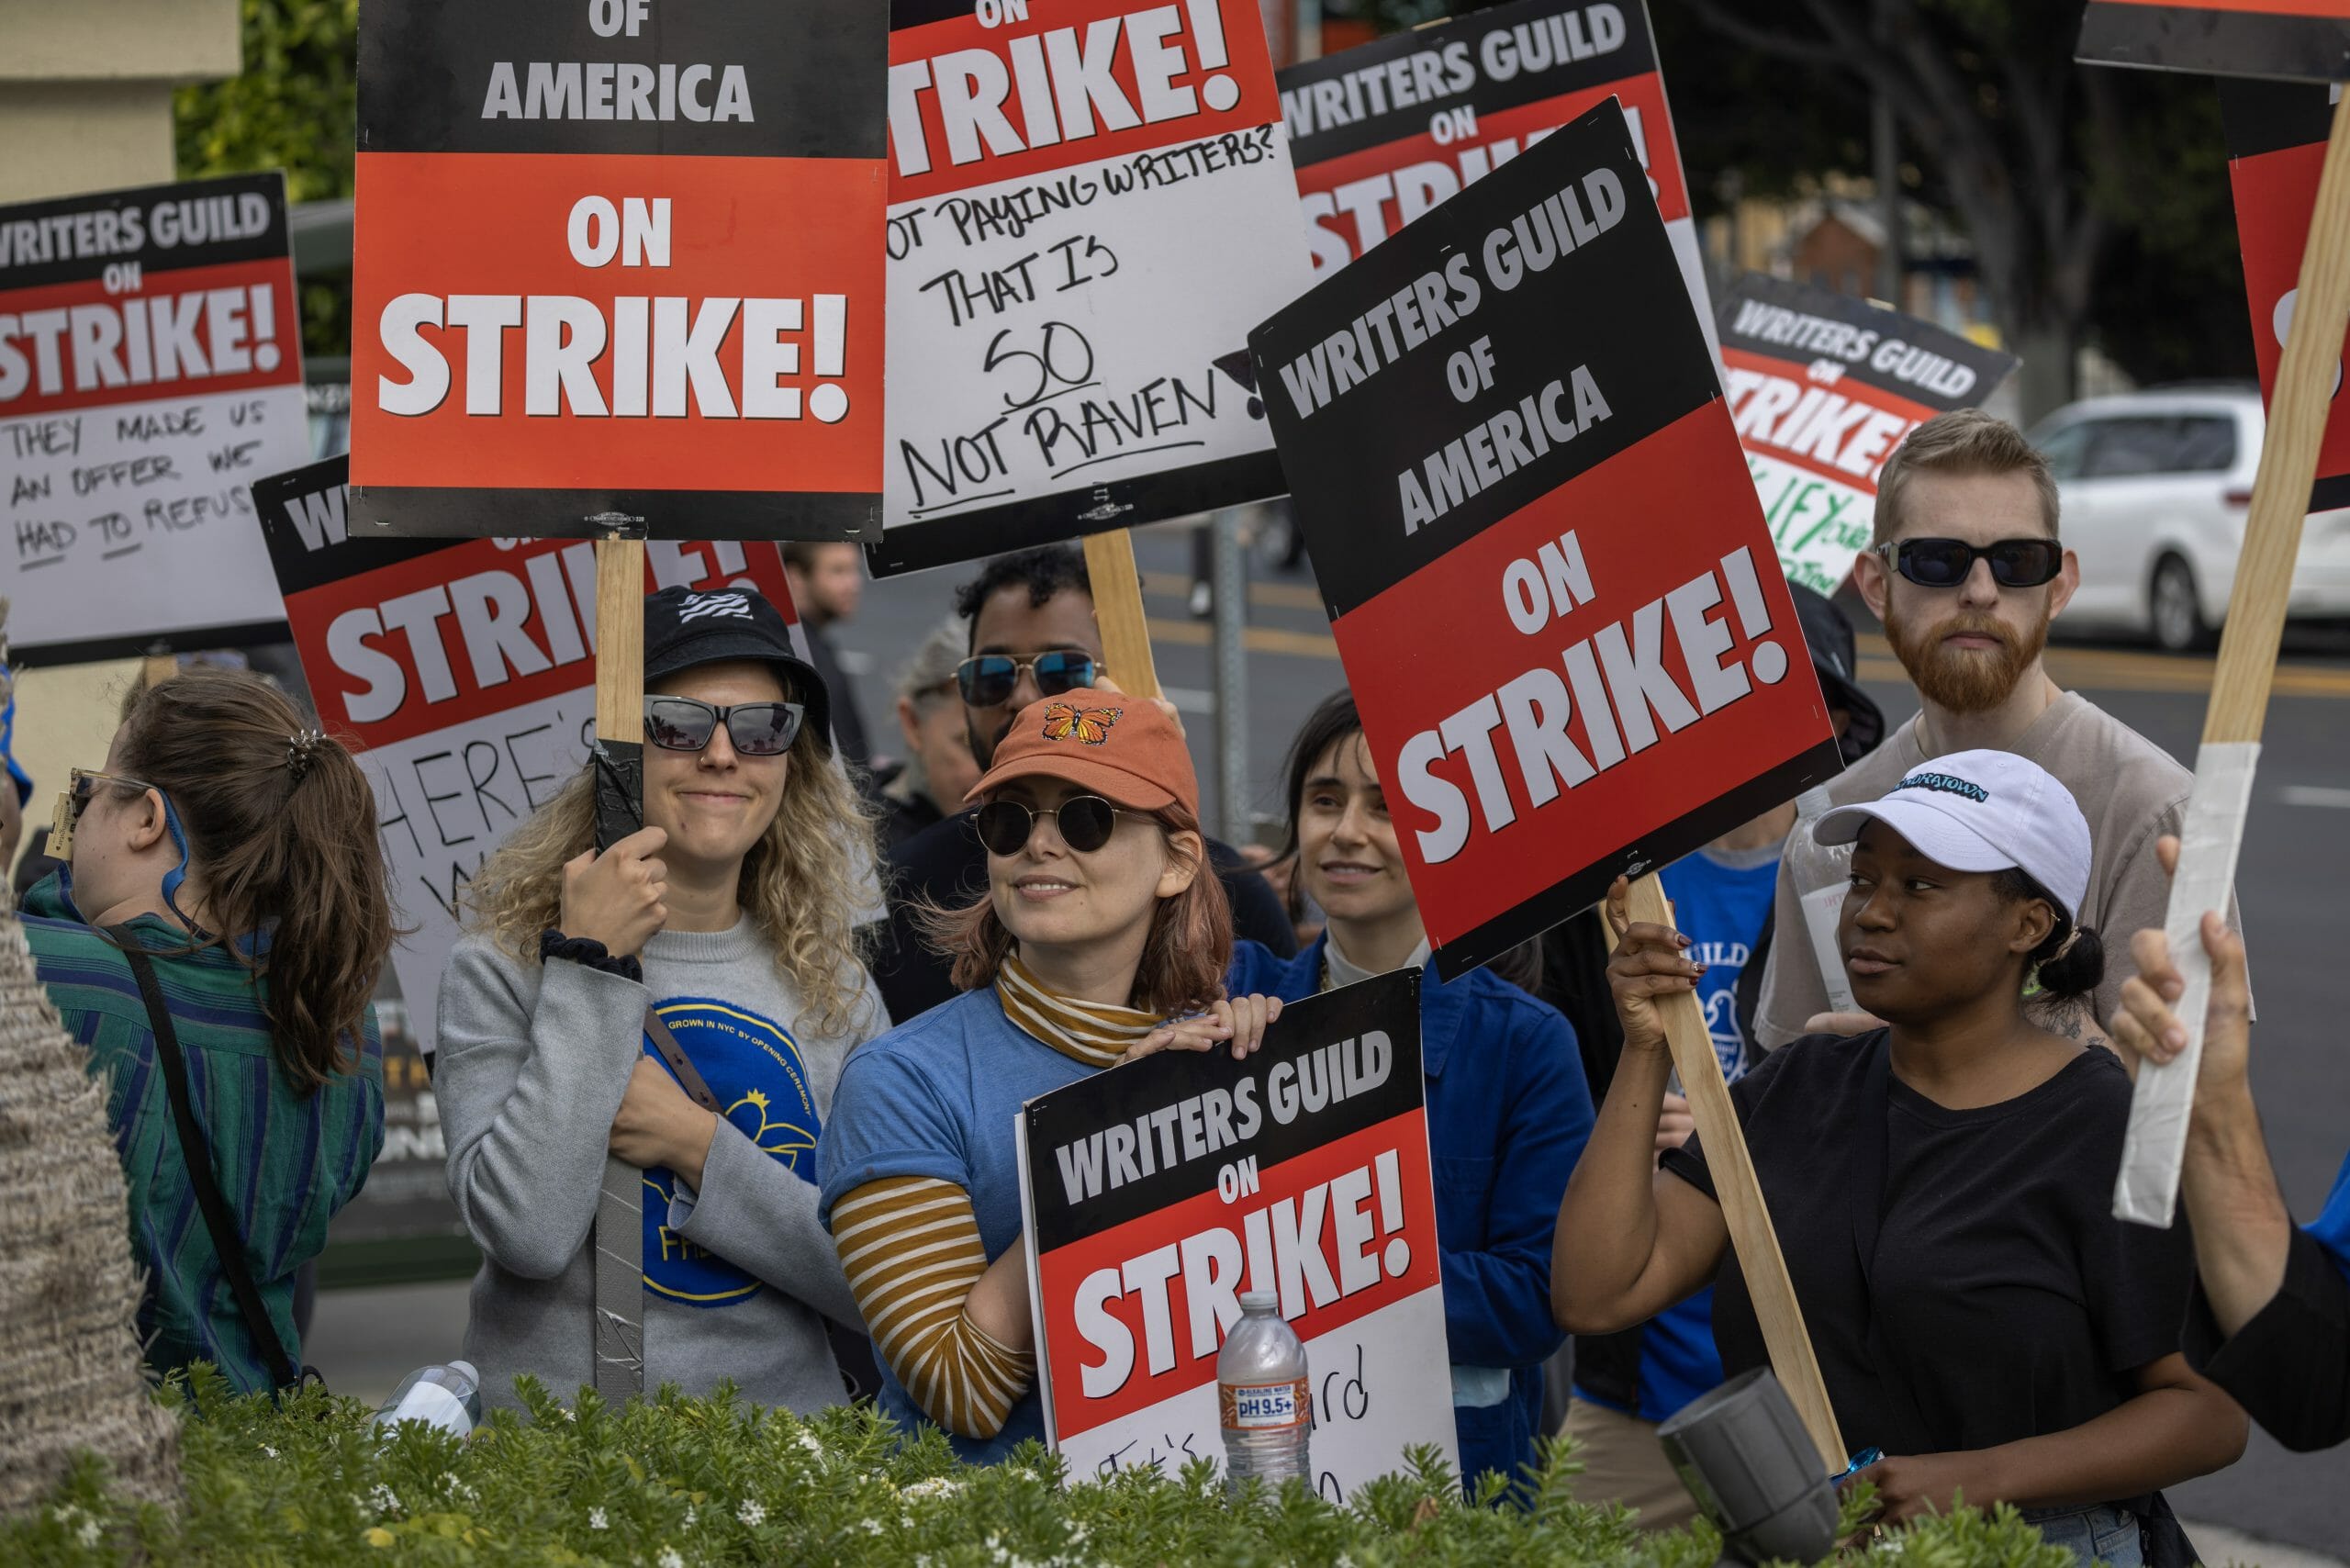 Lights, camera, action: Why the Hollywood writers’ strike matters